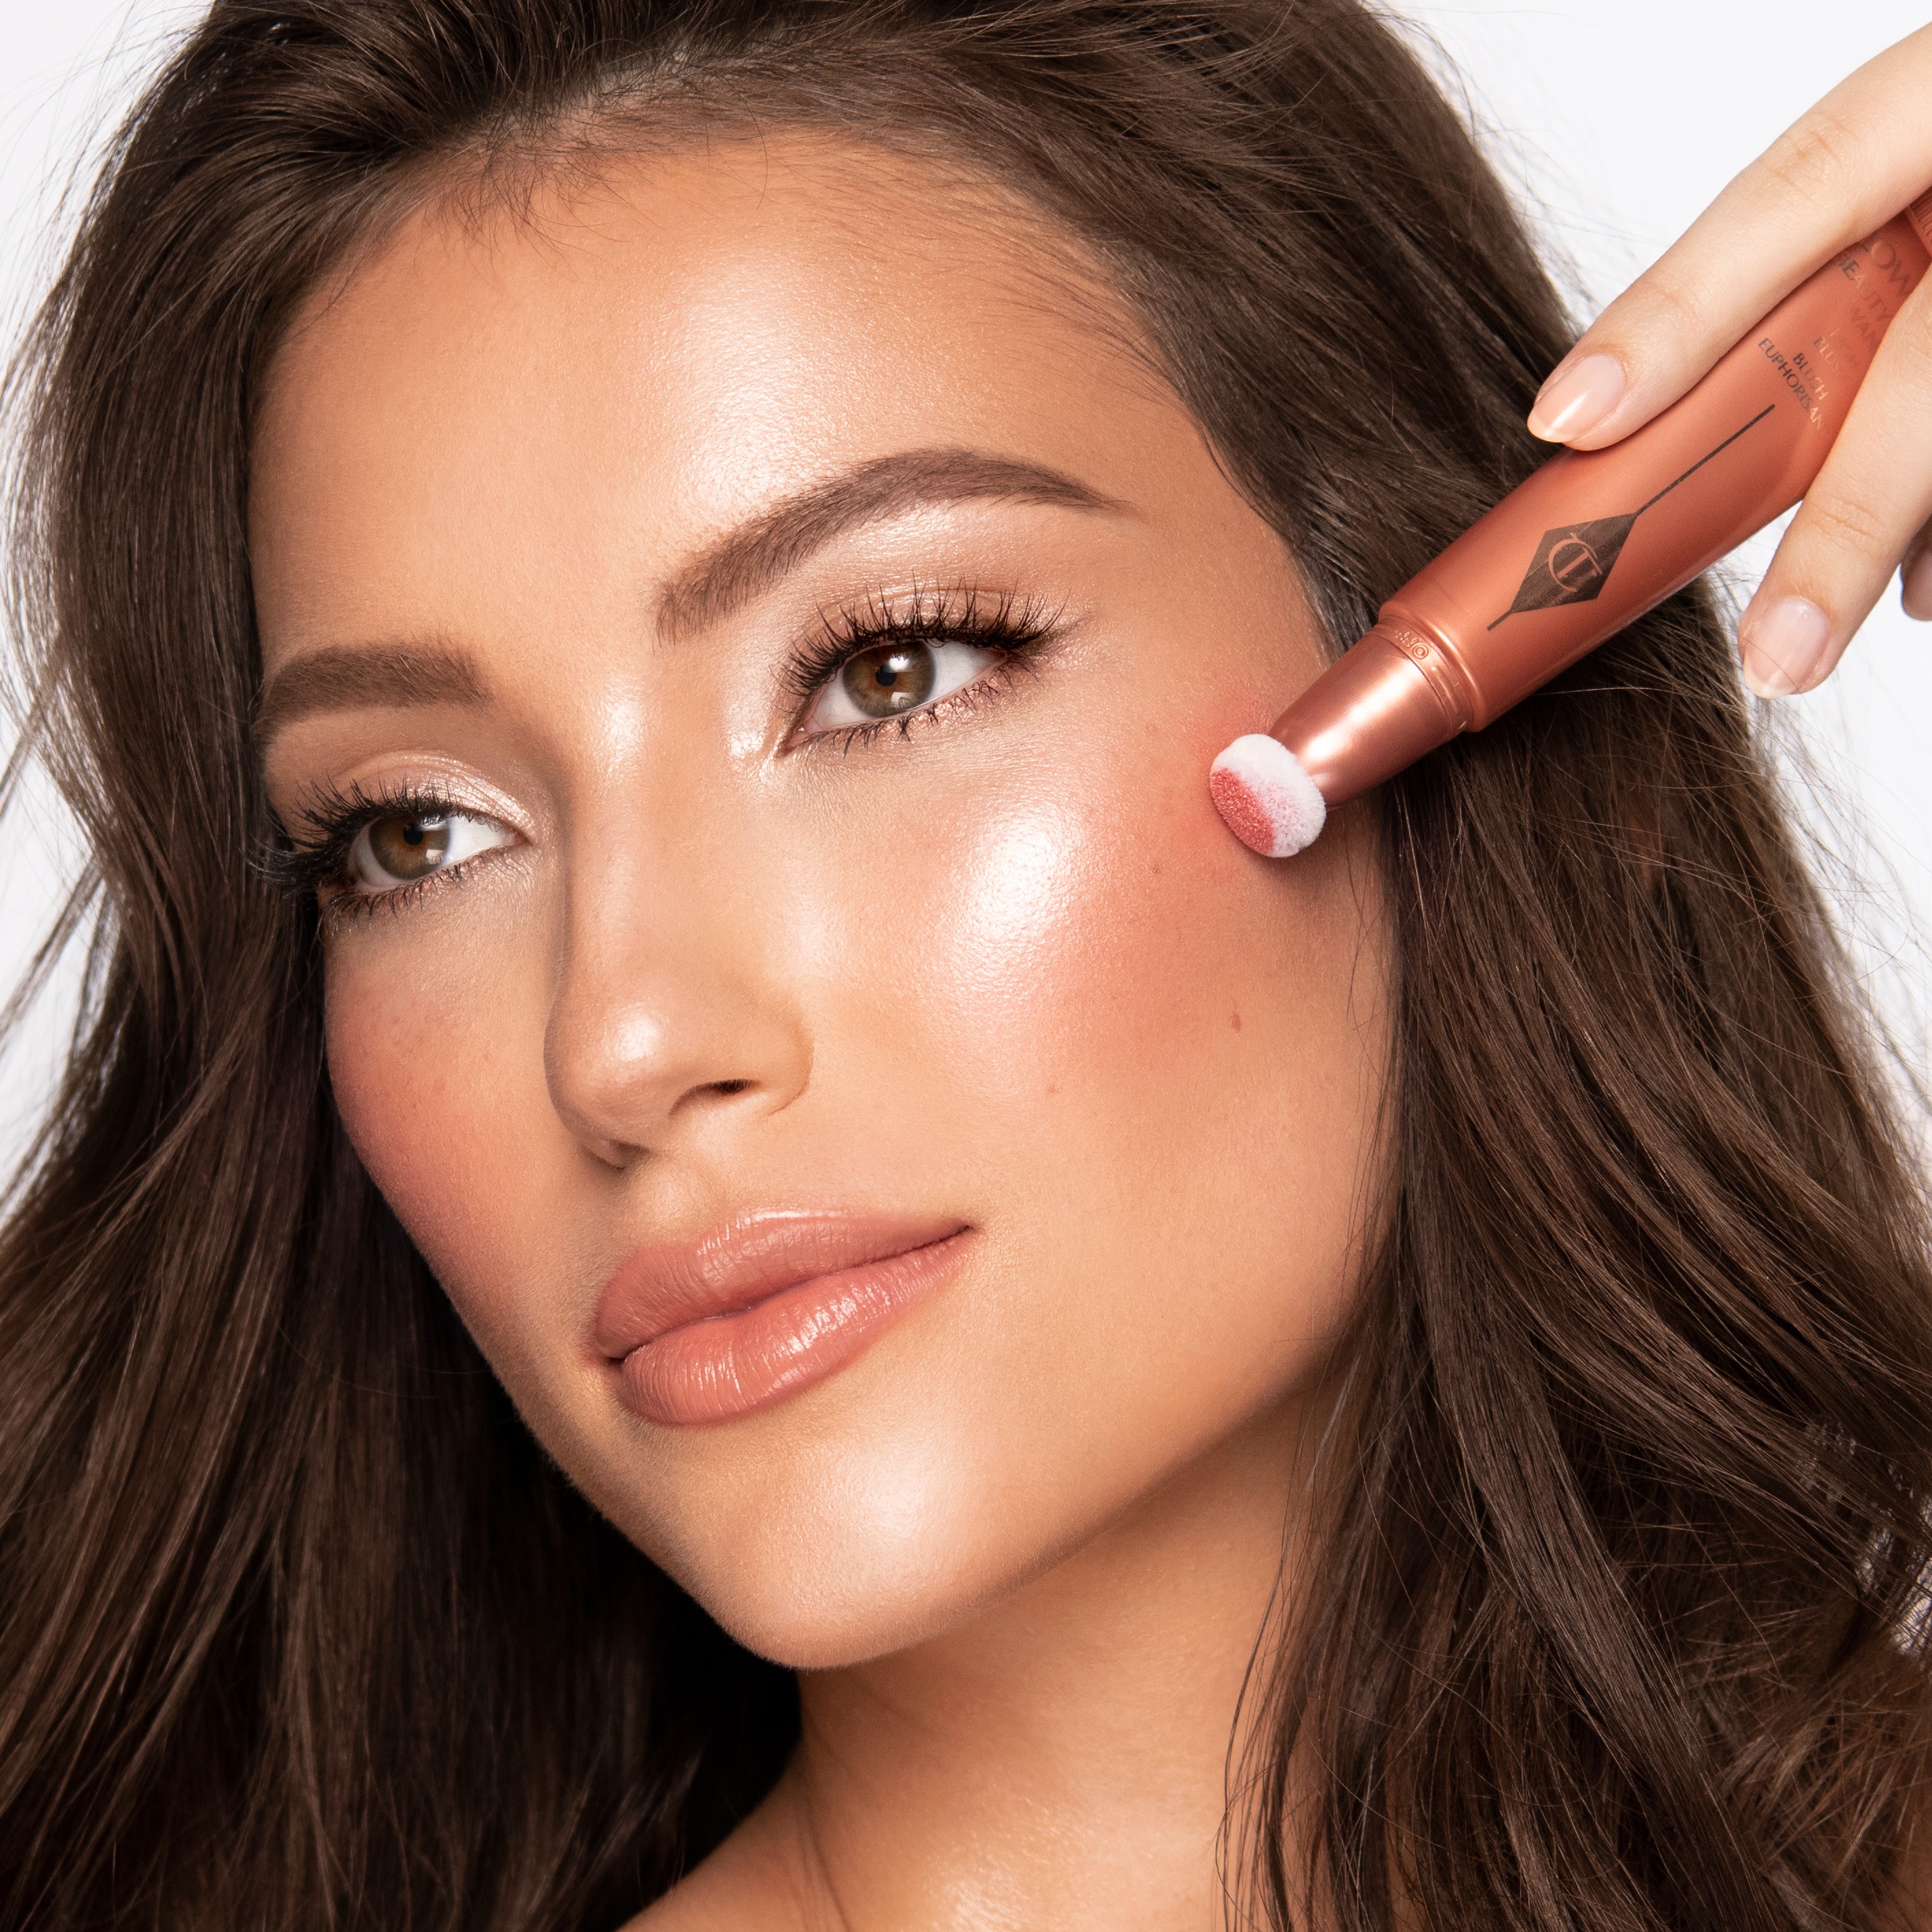 Medium-tone brunette model wearing glowy, nude coral-pink soft glam makeup look while getting applying a glowy coral blush applied from liquid highlighter blush wand.